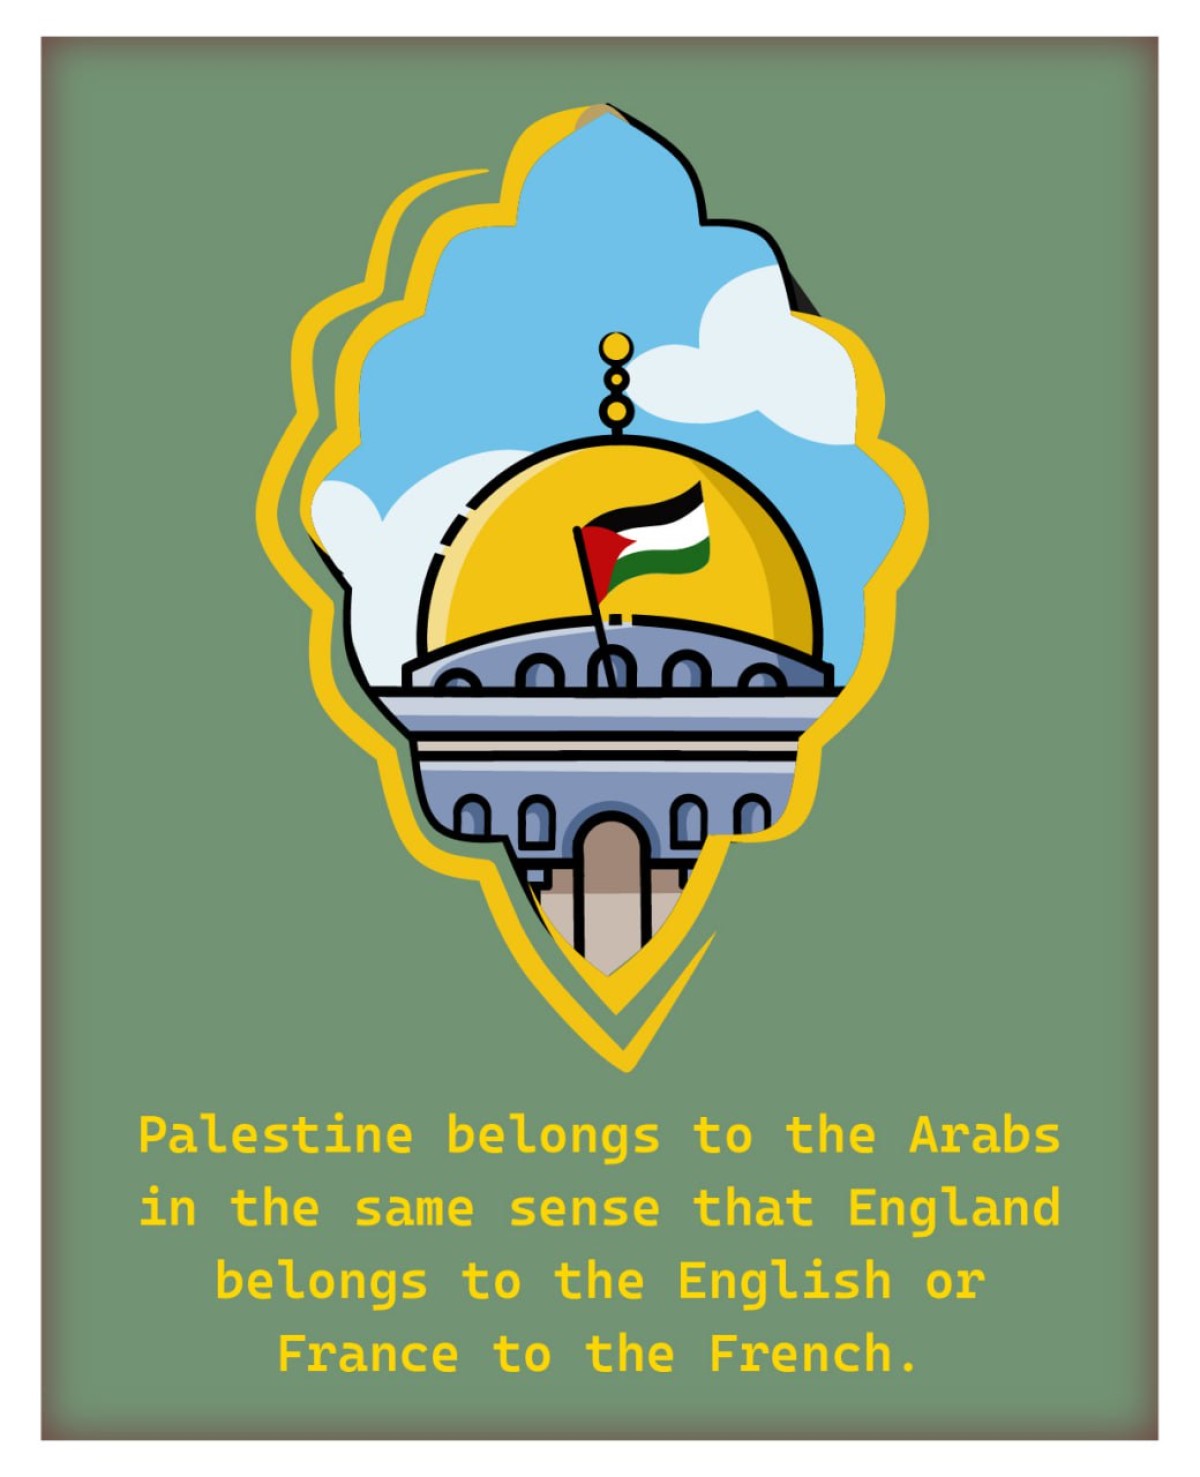 Palestine belongs to the Arabs in the same sense that England belongs to the English or France to the French.